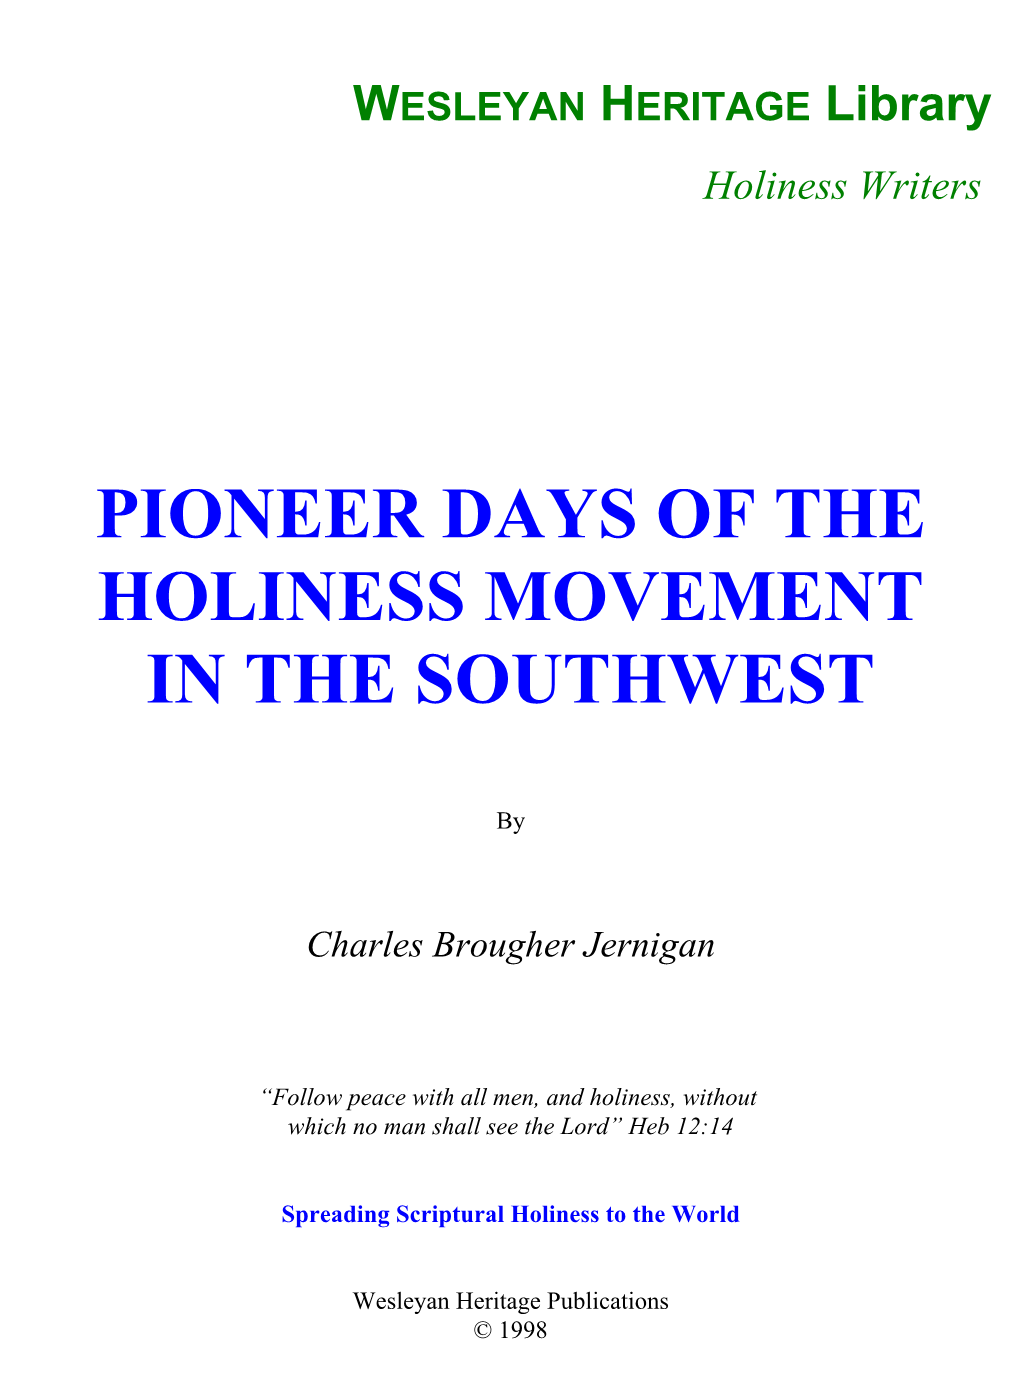 Pioneer Days of the Holiness Movement in the Southwest